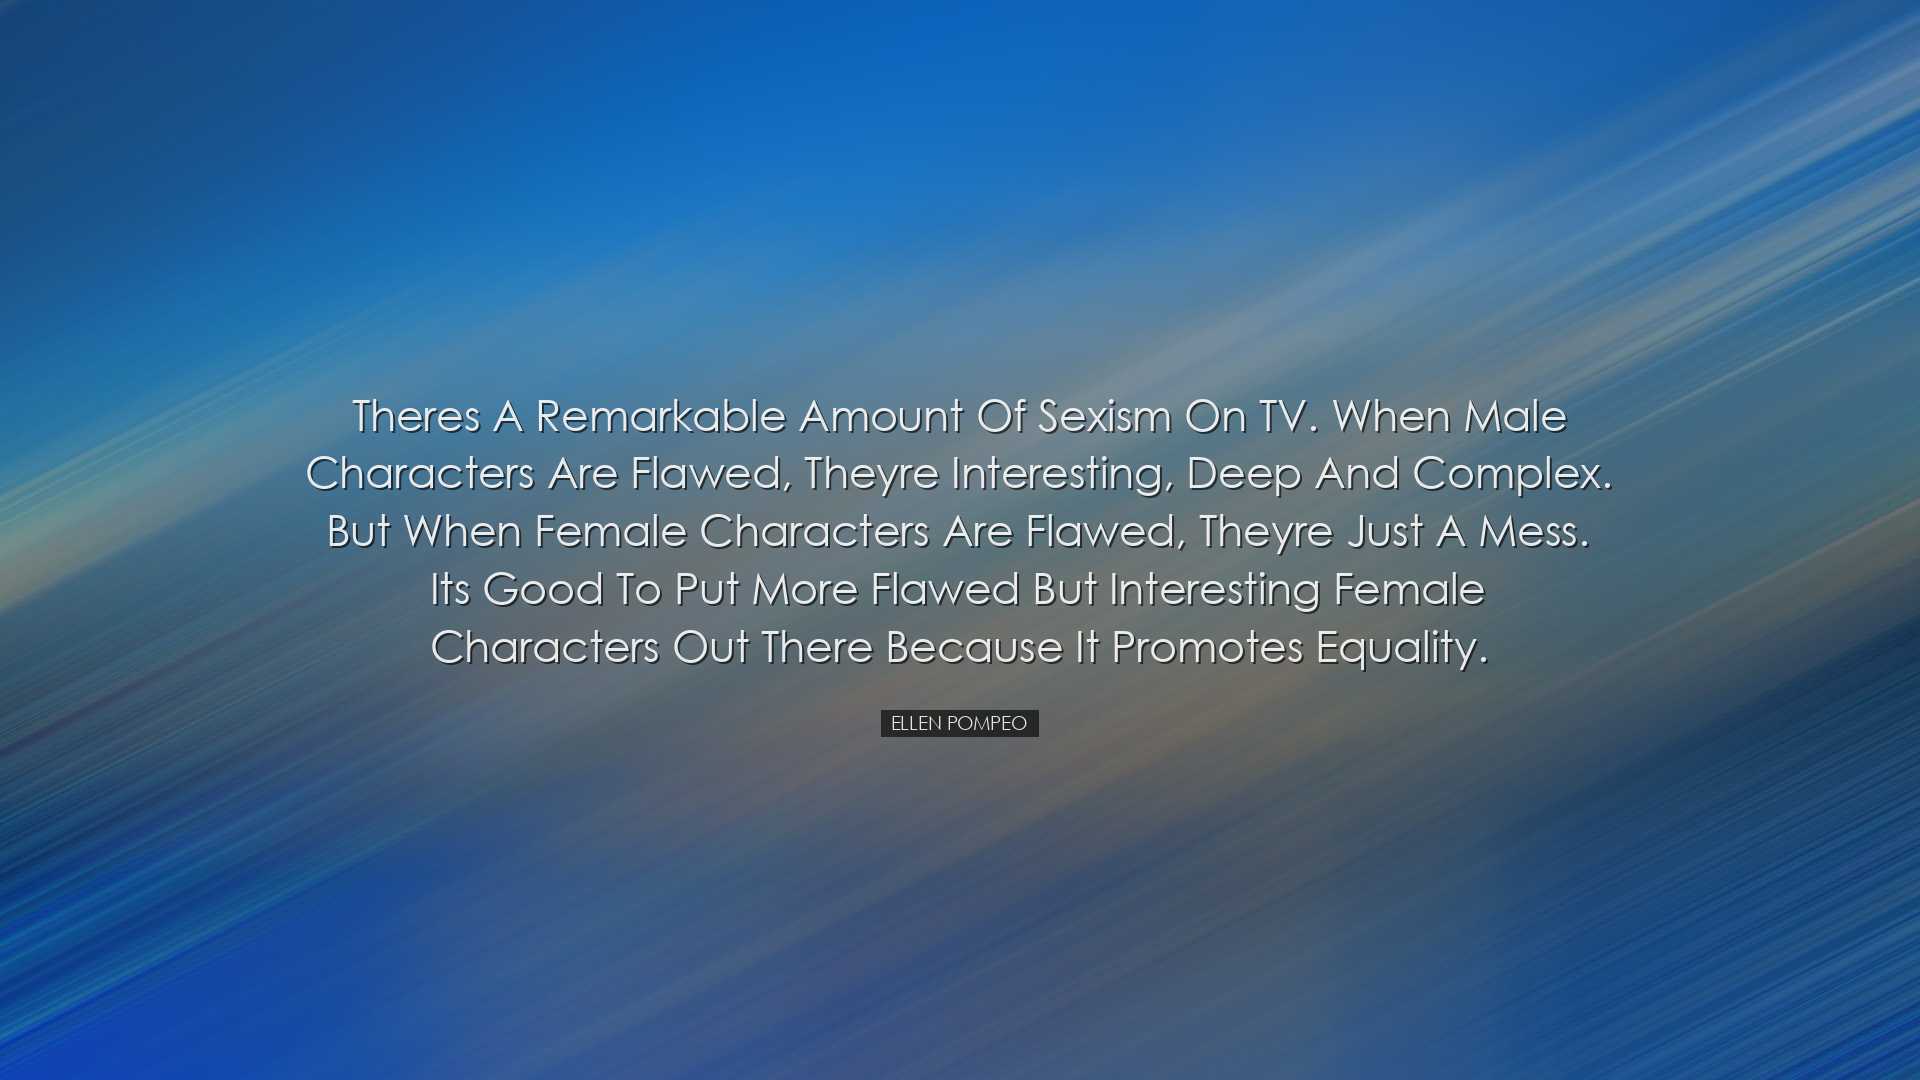 Theres a remarkable amount of sexism on TV. When male characters a